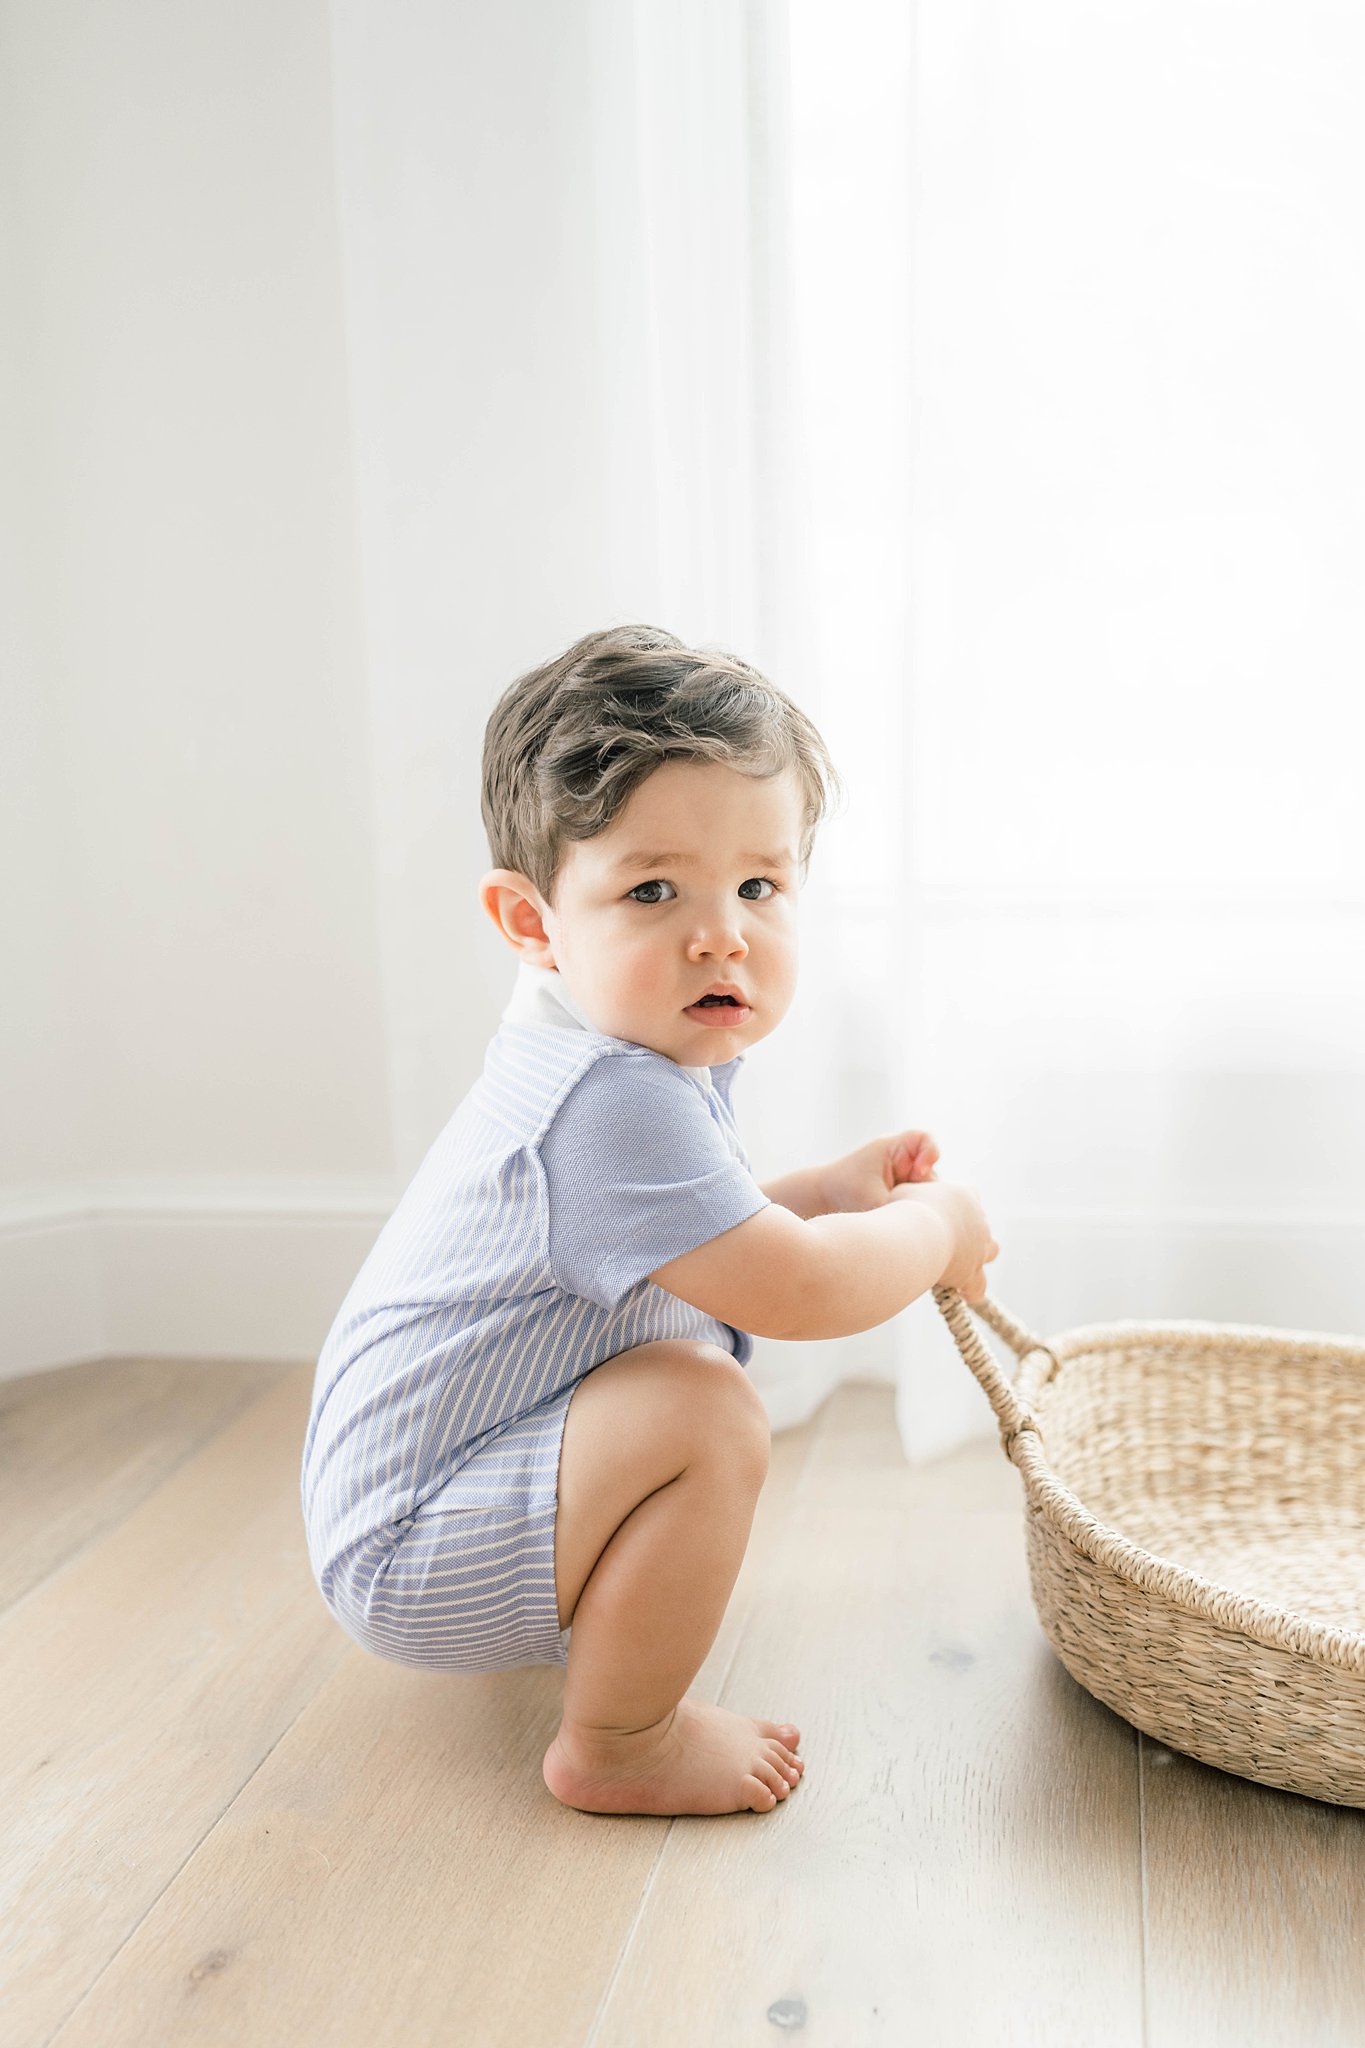 A young boy squats by a window while playing with a wicker basket okc family activities